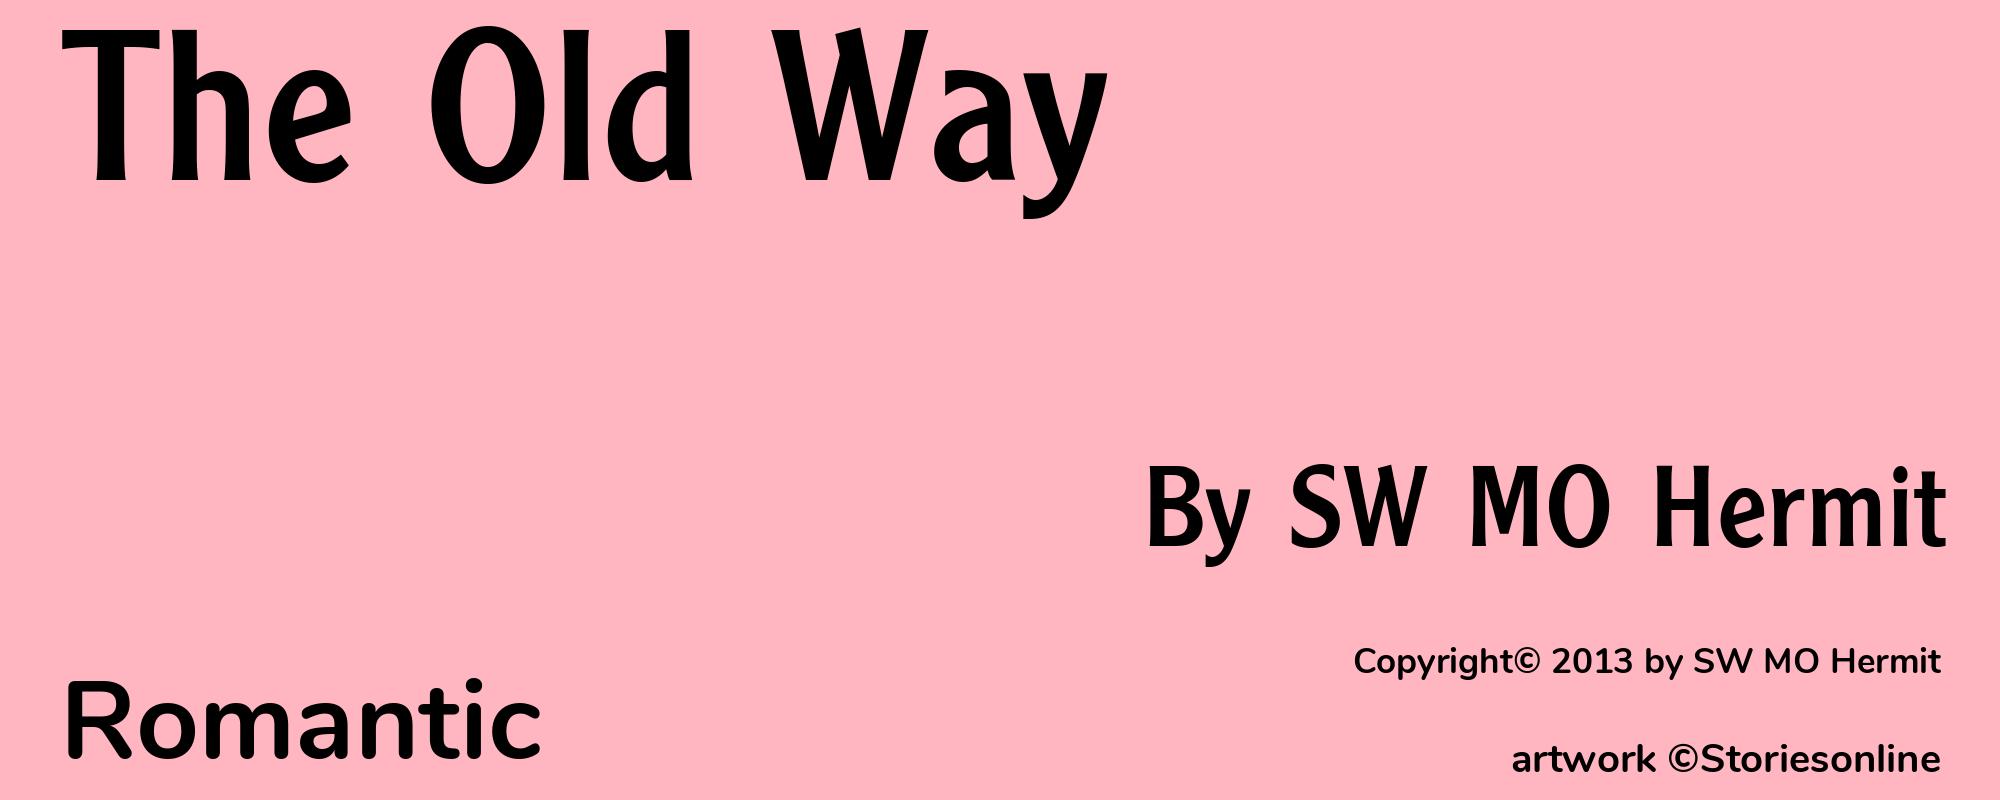 The Old Way - Cover